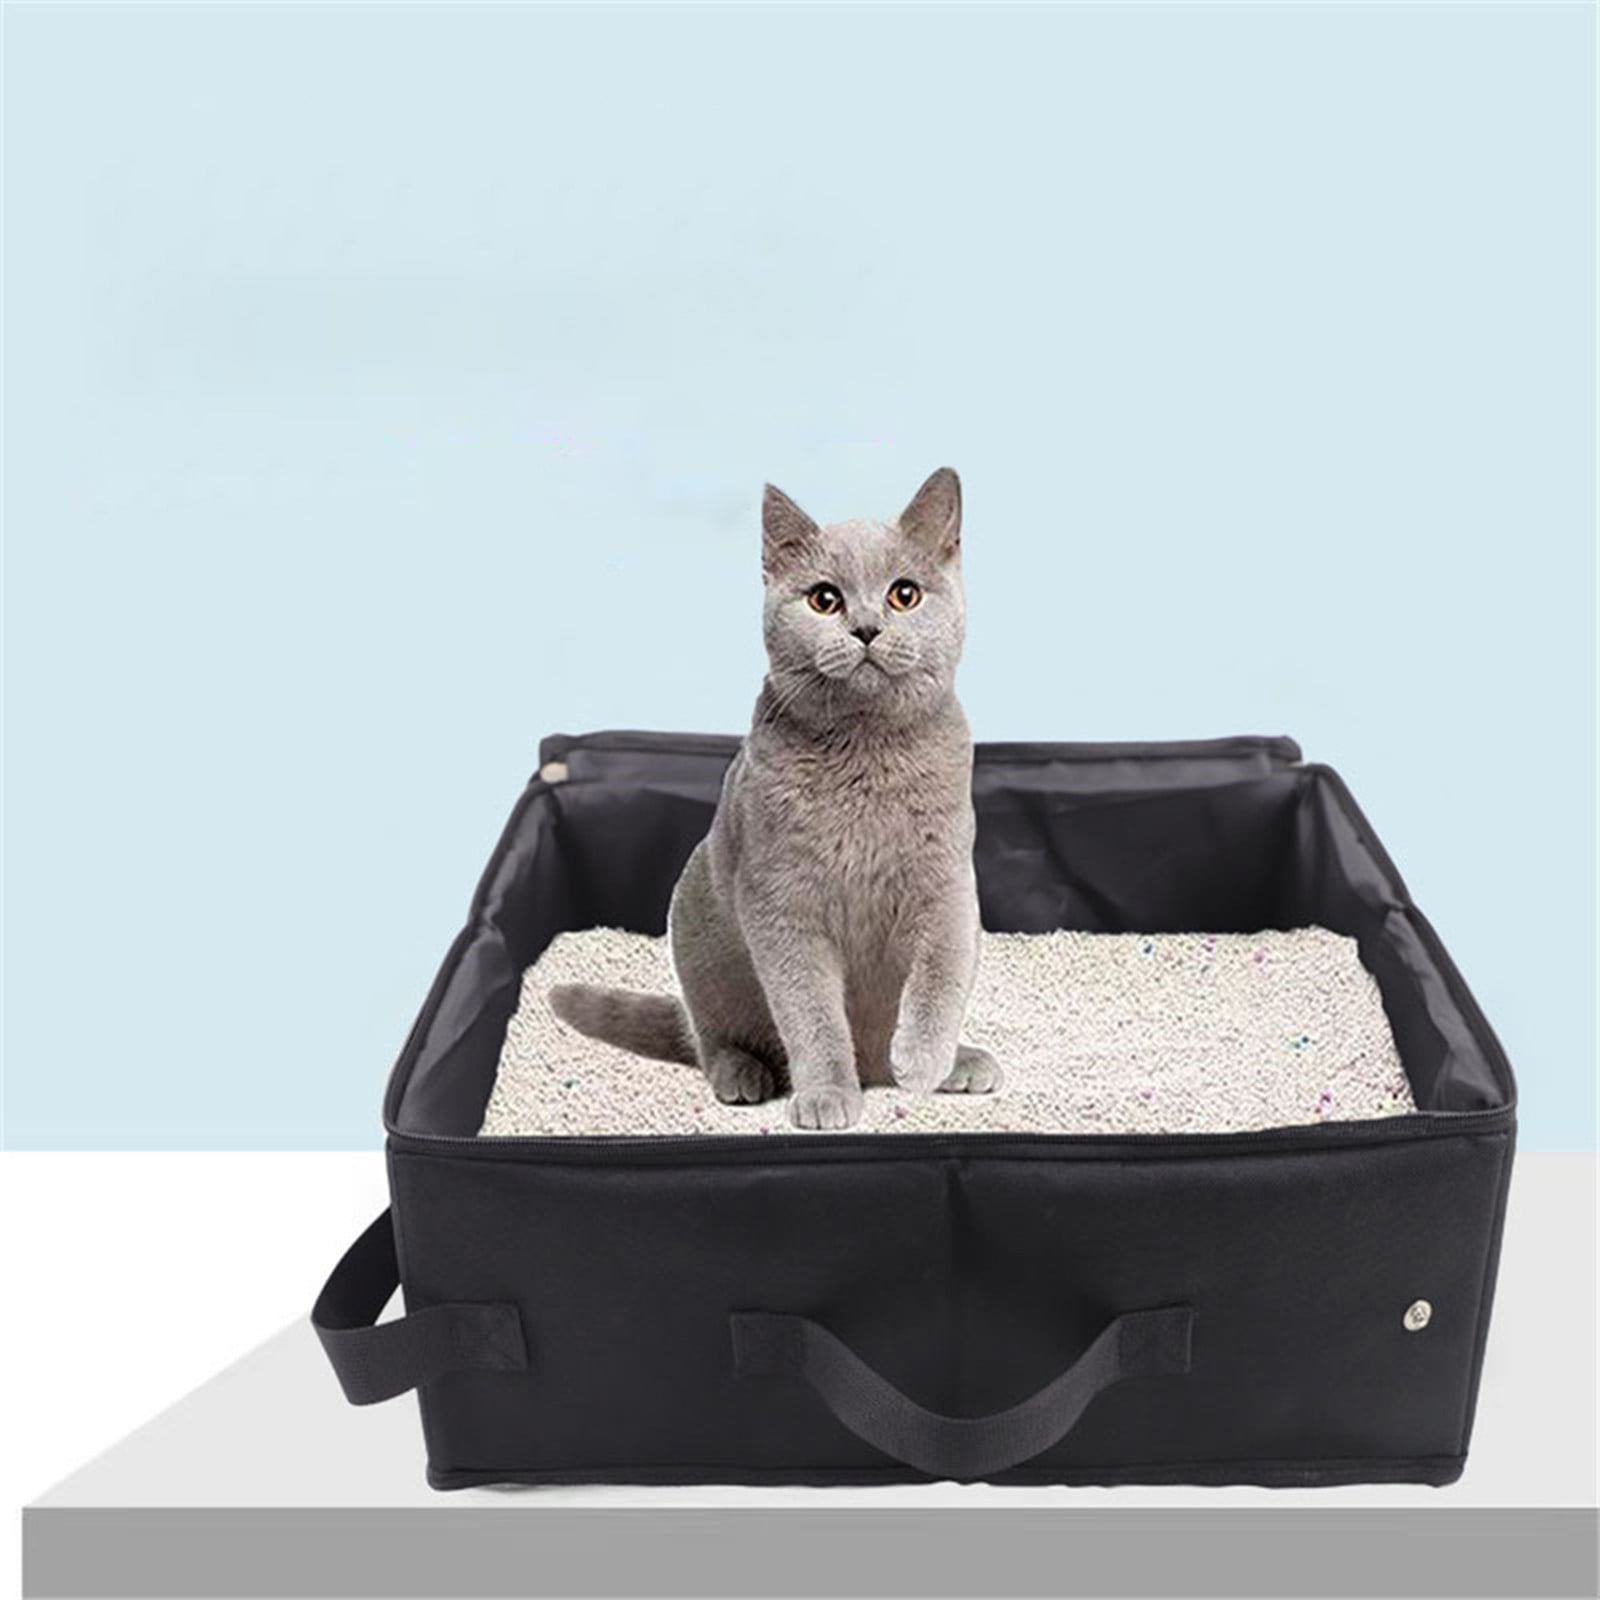 Review of the Cateco® Odour-Proof Litter Box - Katzenworld